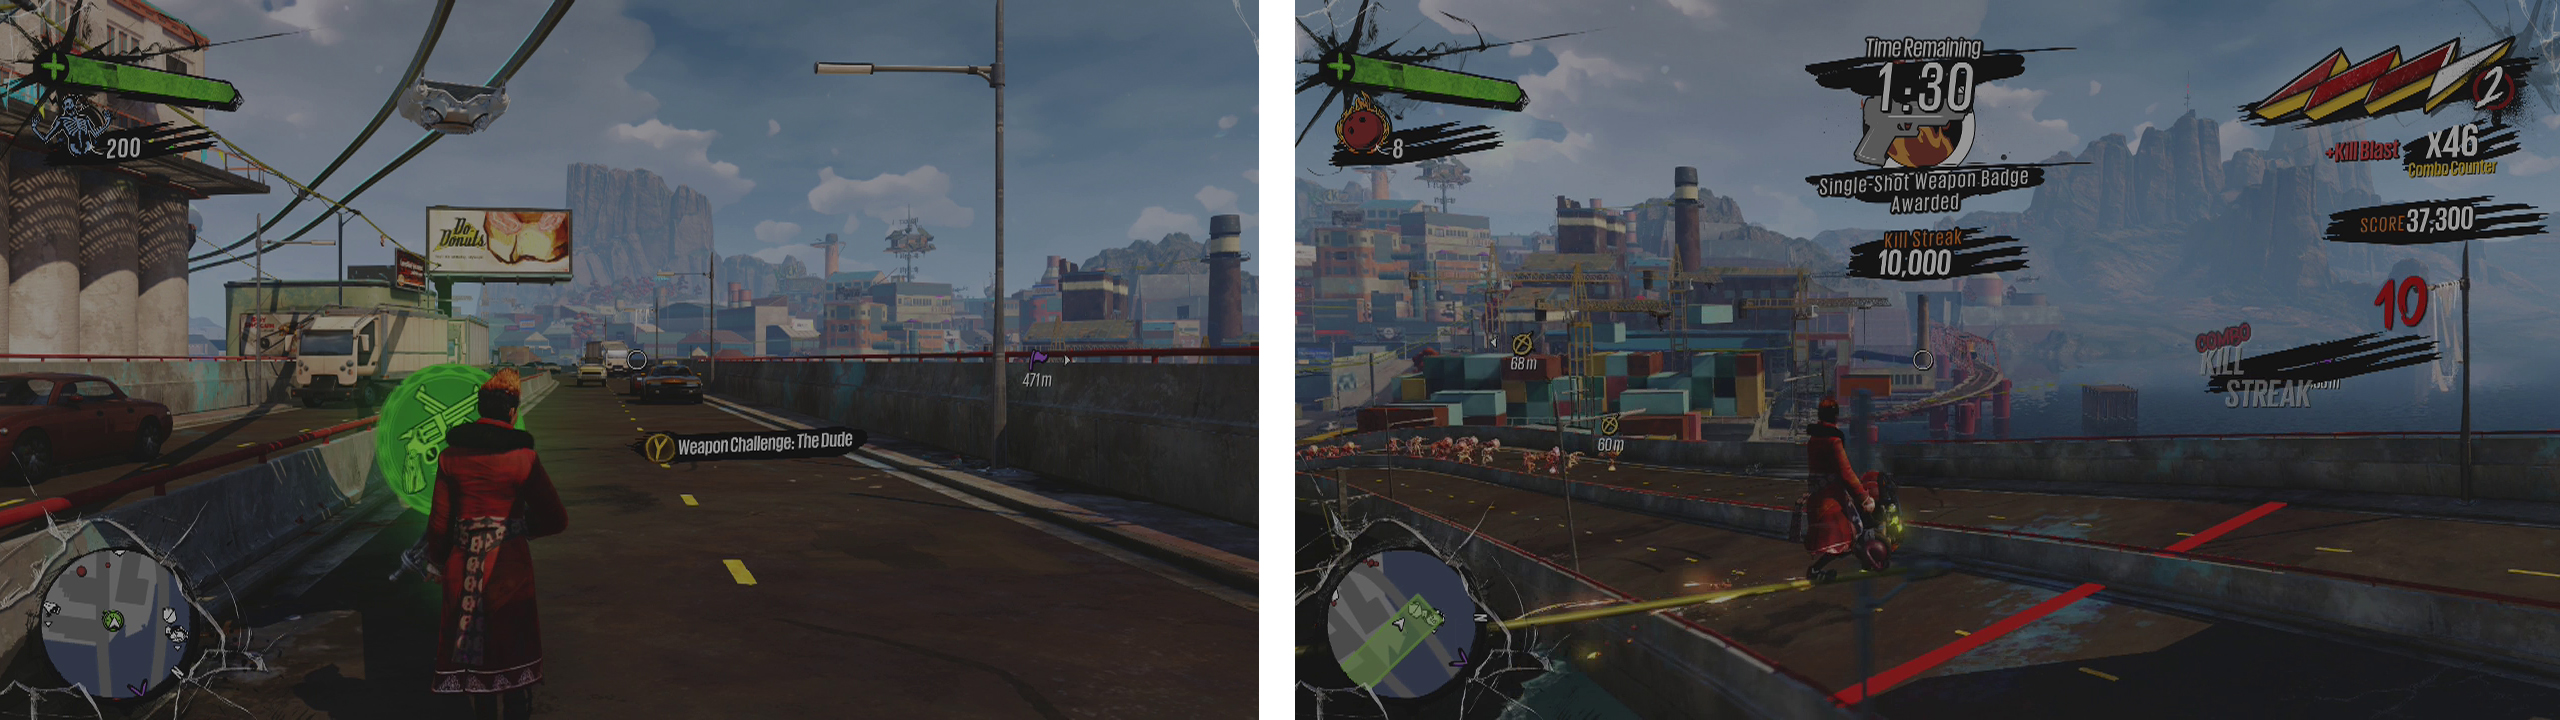 You can start the challenge here (left). We need to traverse between the two highways to defend our safe zone (right).